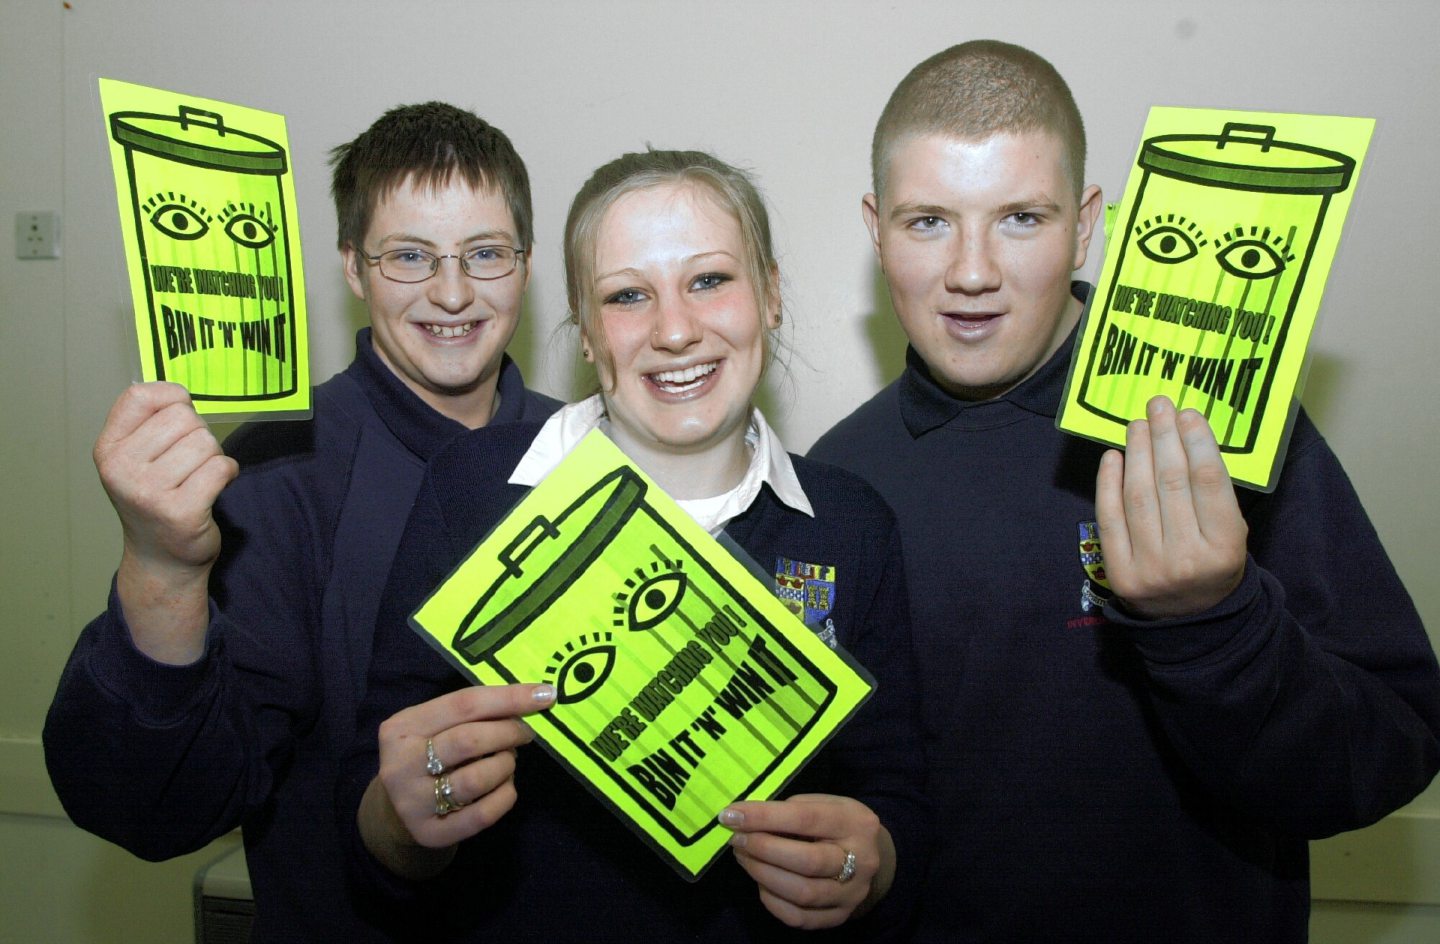 Inverurie Academy pupils posing for photos holding anti-littering leaflets